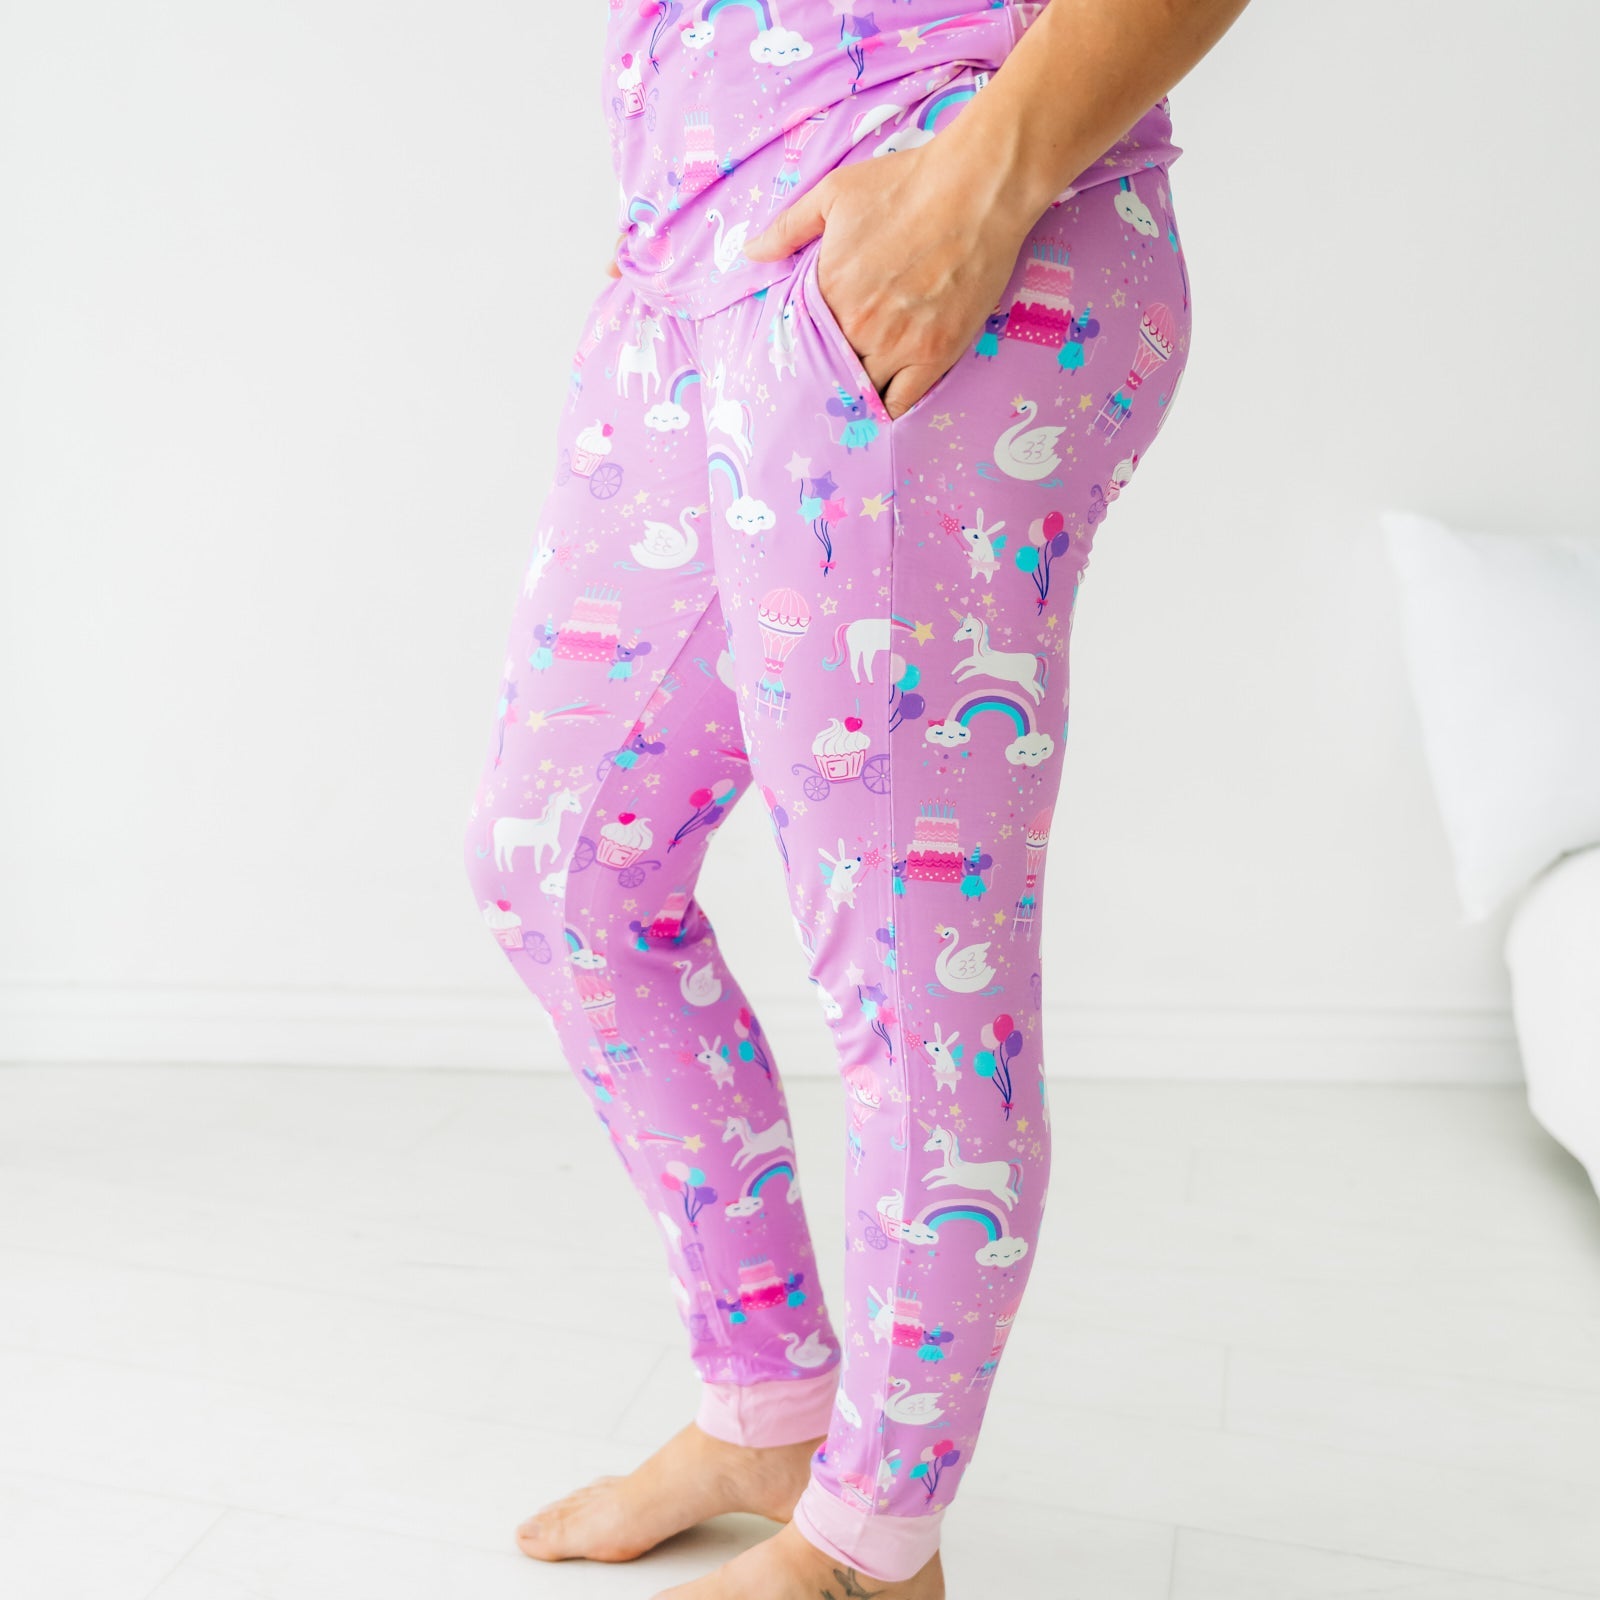 Close up profile image of a woman wearing Magical Birthday women's pj pants